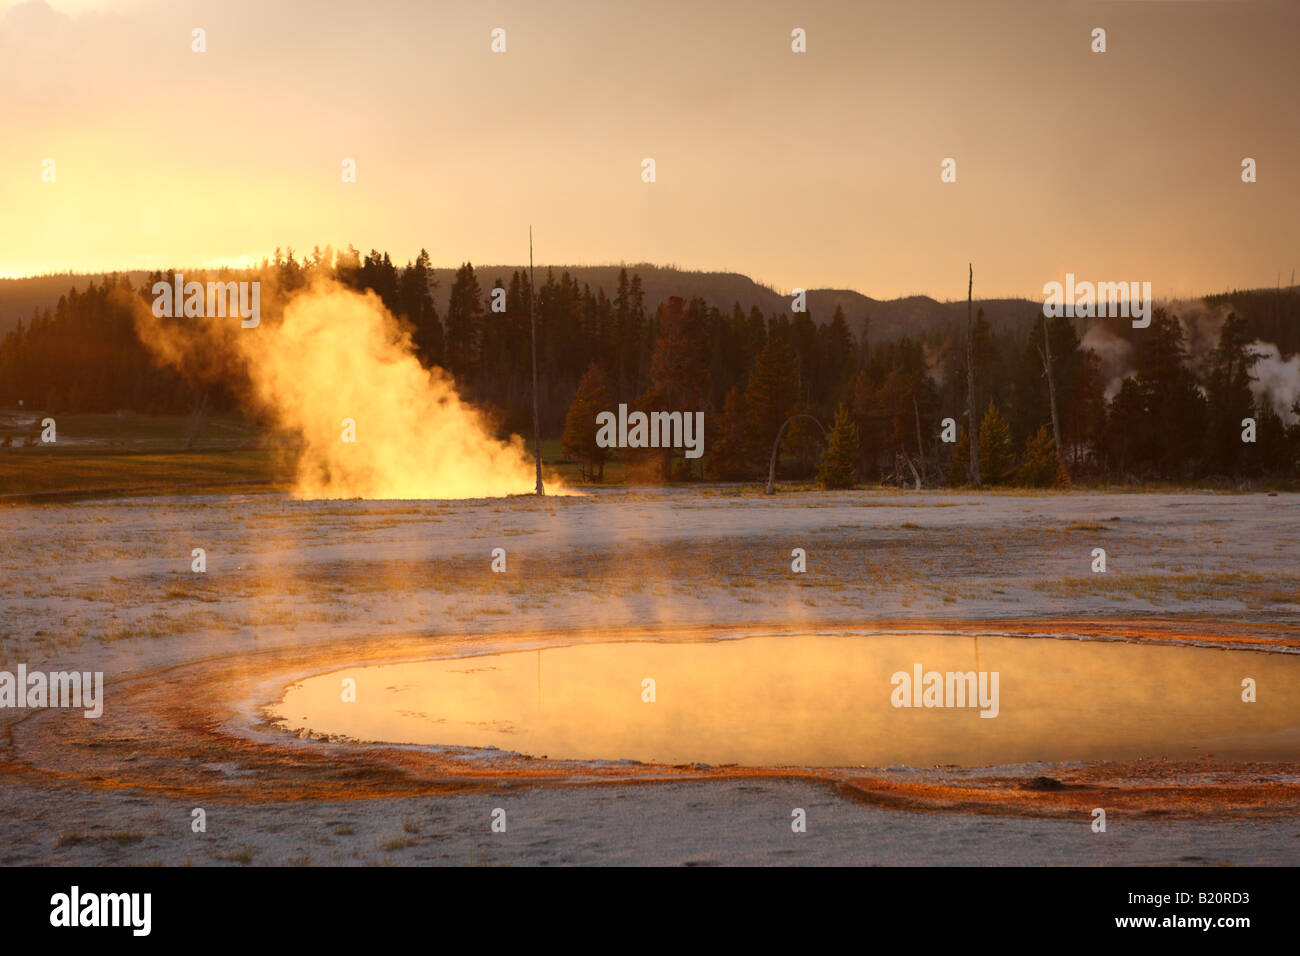 Upper Geyser Basin Yellowstone National Park Banque D'Images